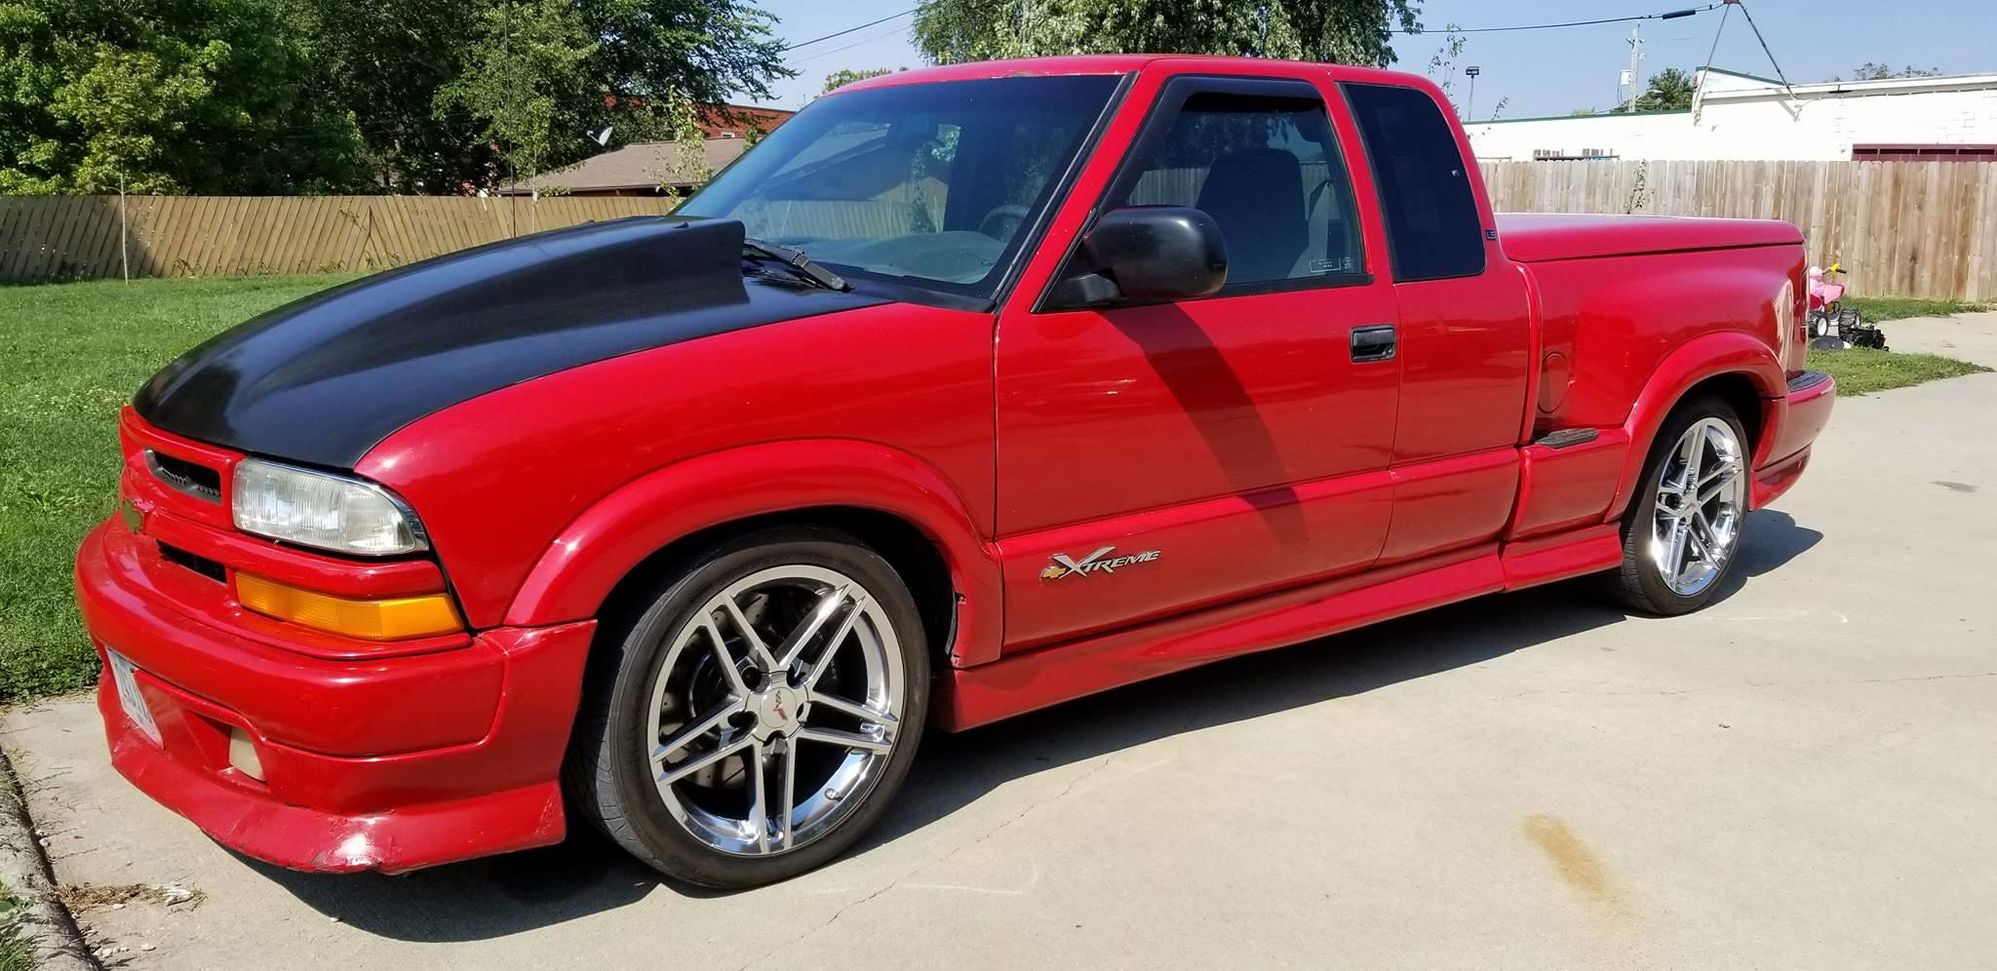 2000 Chevy S-10 with a Supercharged 6.0 L LSx V8